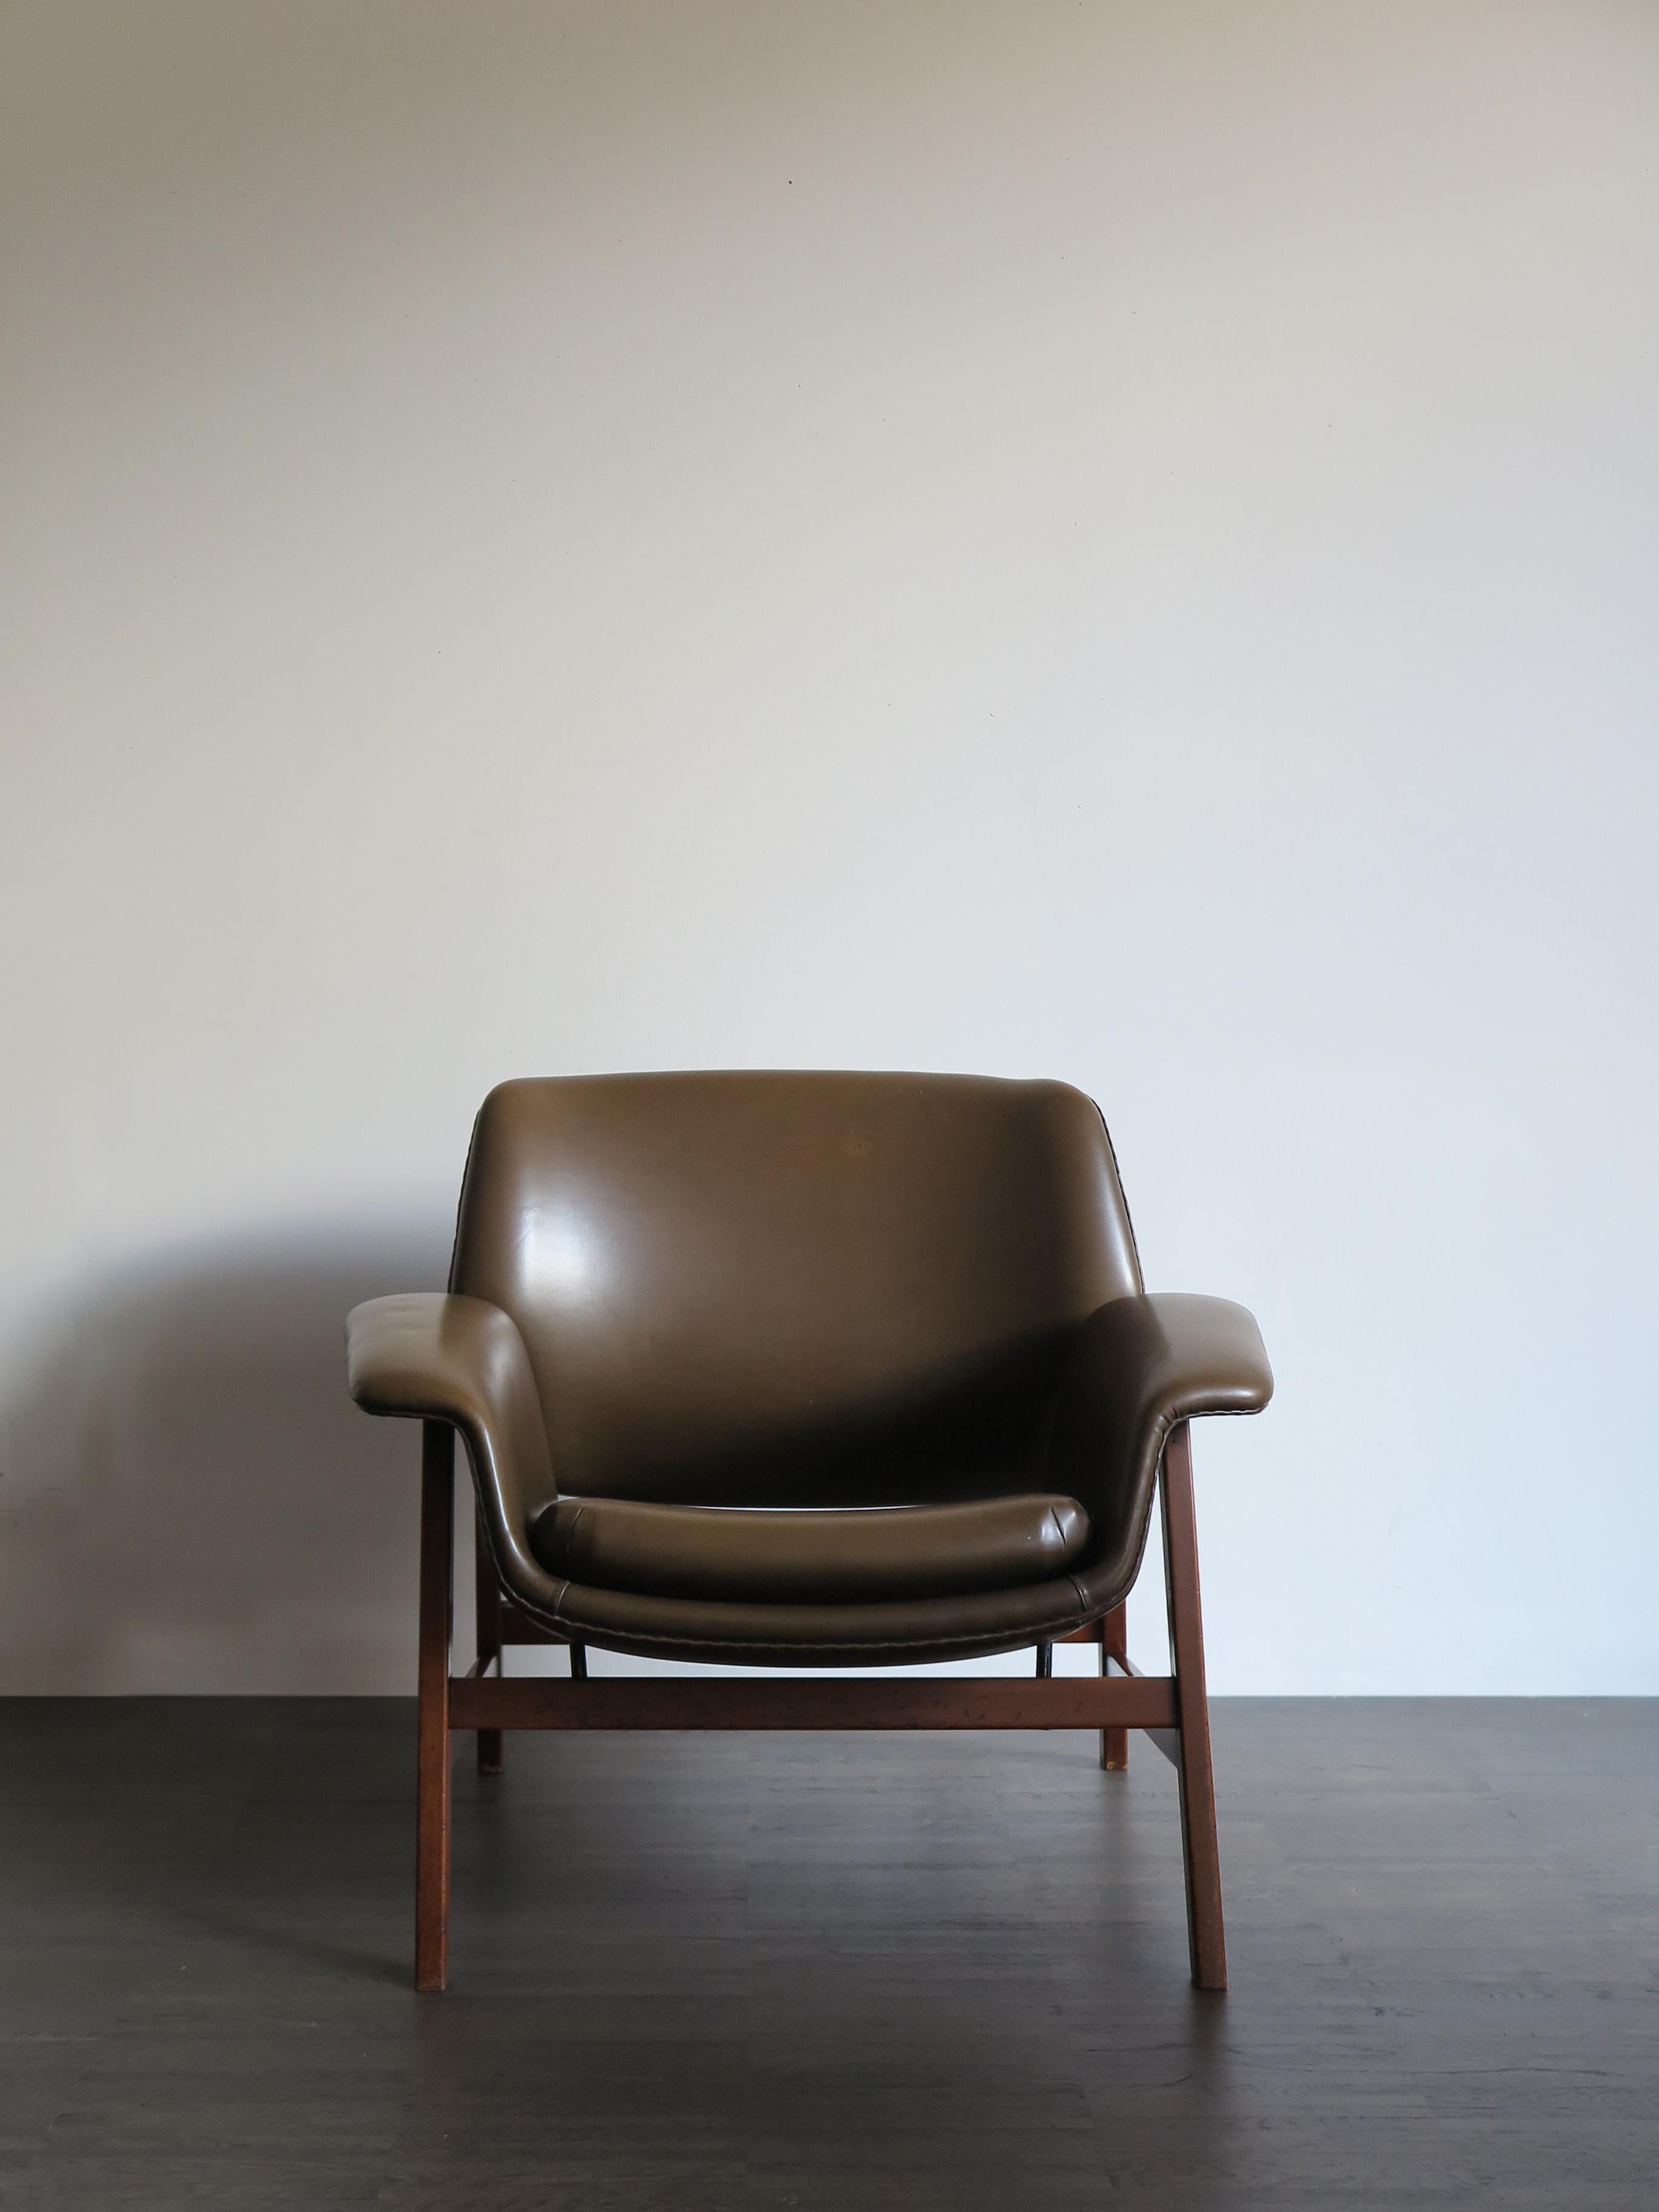 1950s Italian armchair model 849 designed by Gianfranco Frattini for Cassina in 1956, structure in walnut wood and vinyl original upholstery.

Please note that the item is original of the period and this shows normal signs of age and use.